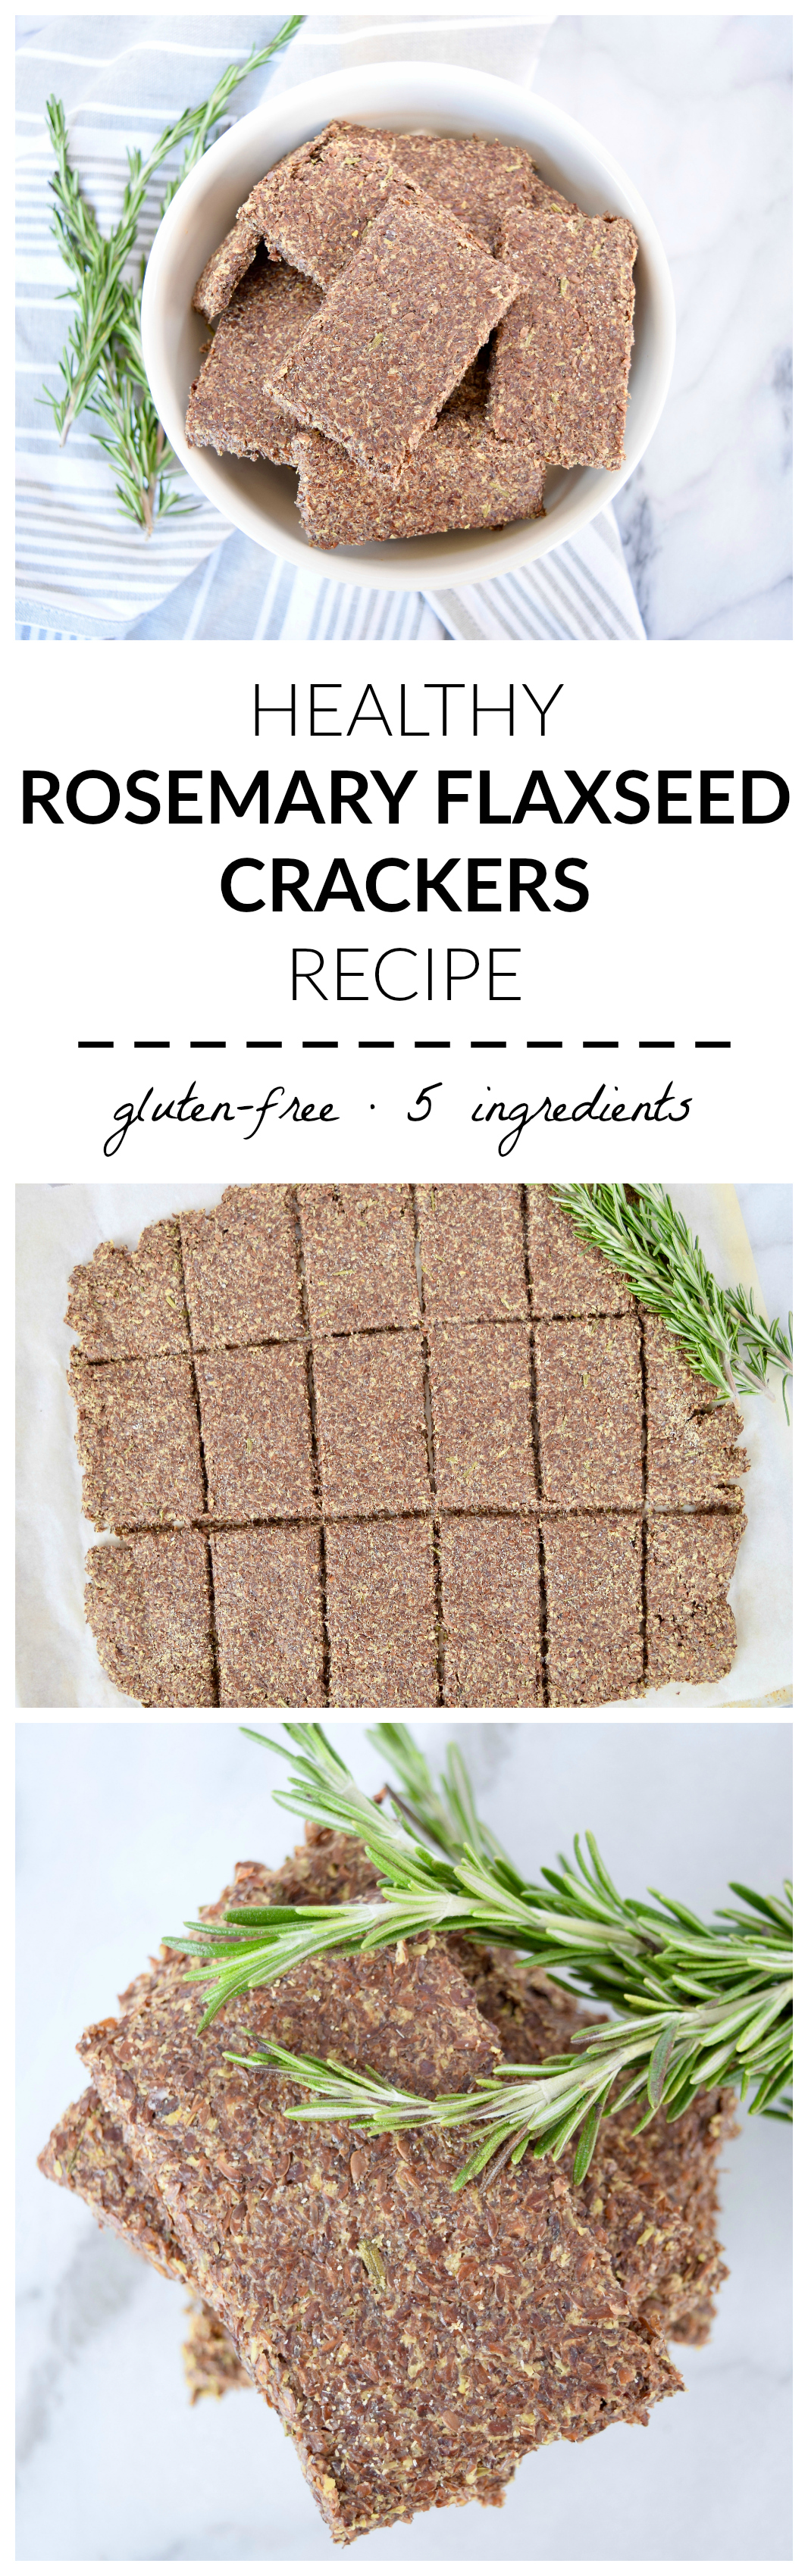 HEALTHY 5 INGREDIENT ROSEMARY FLAXSEED CRACKERS RECIPE